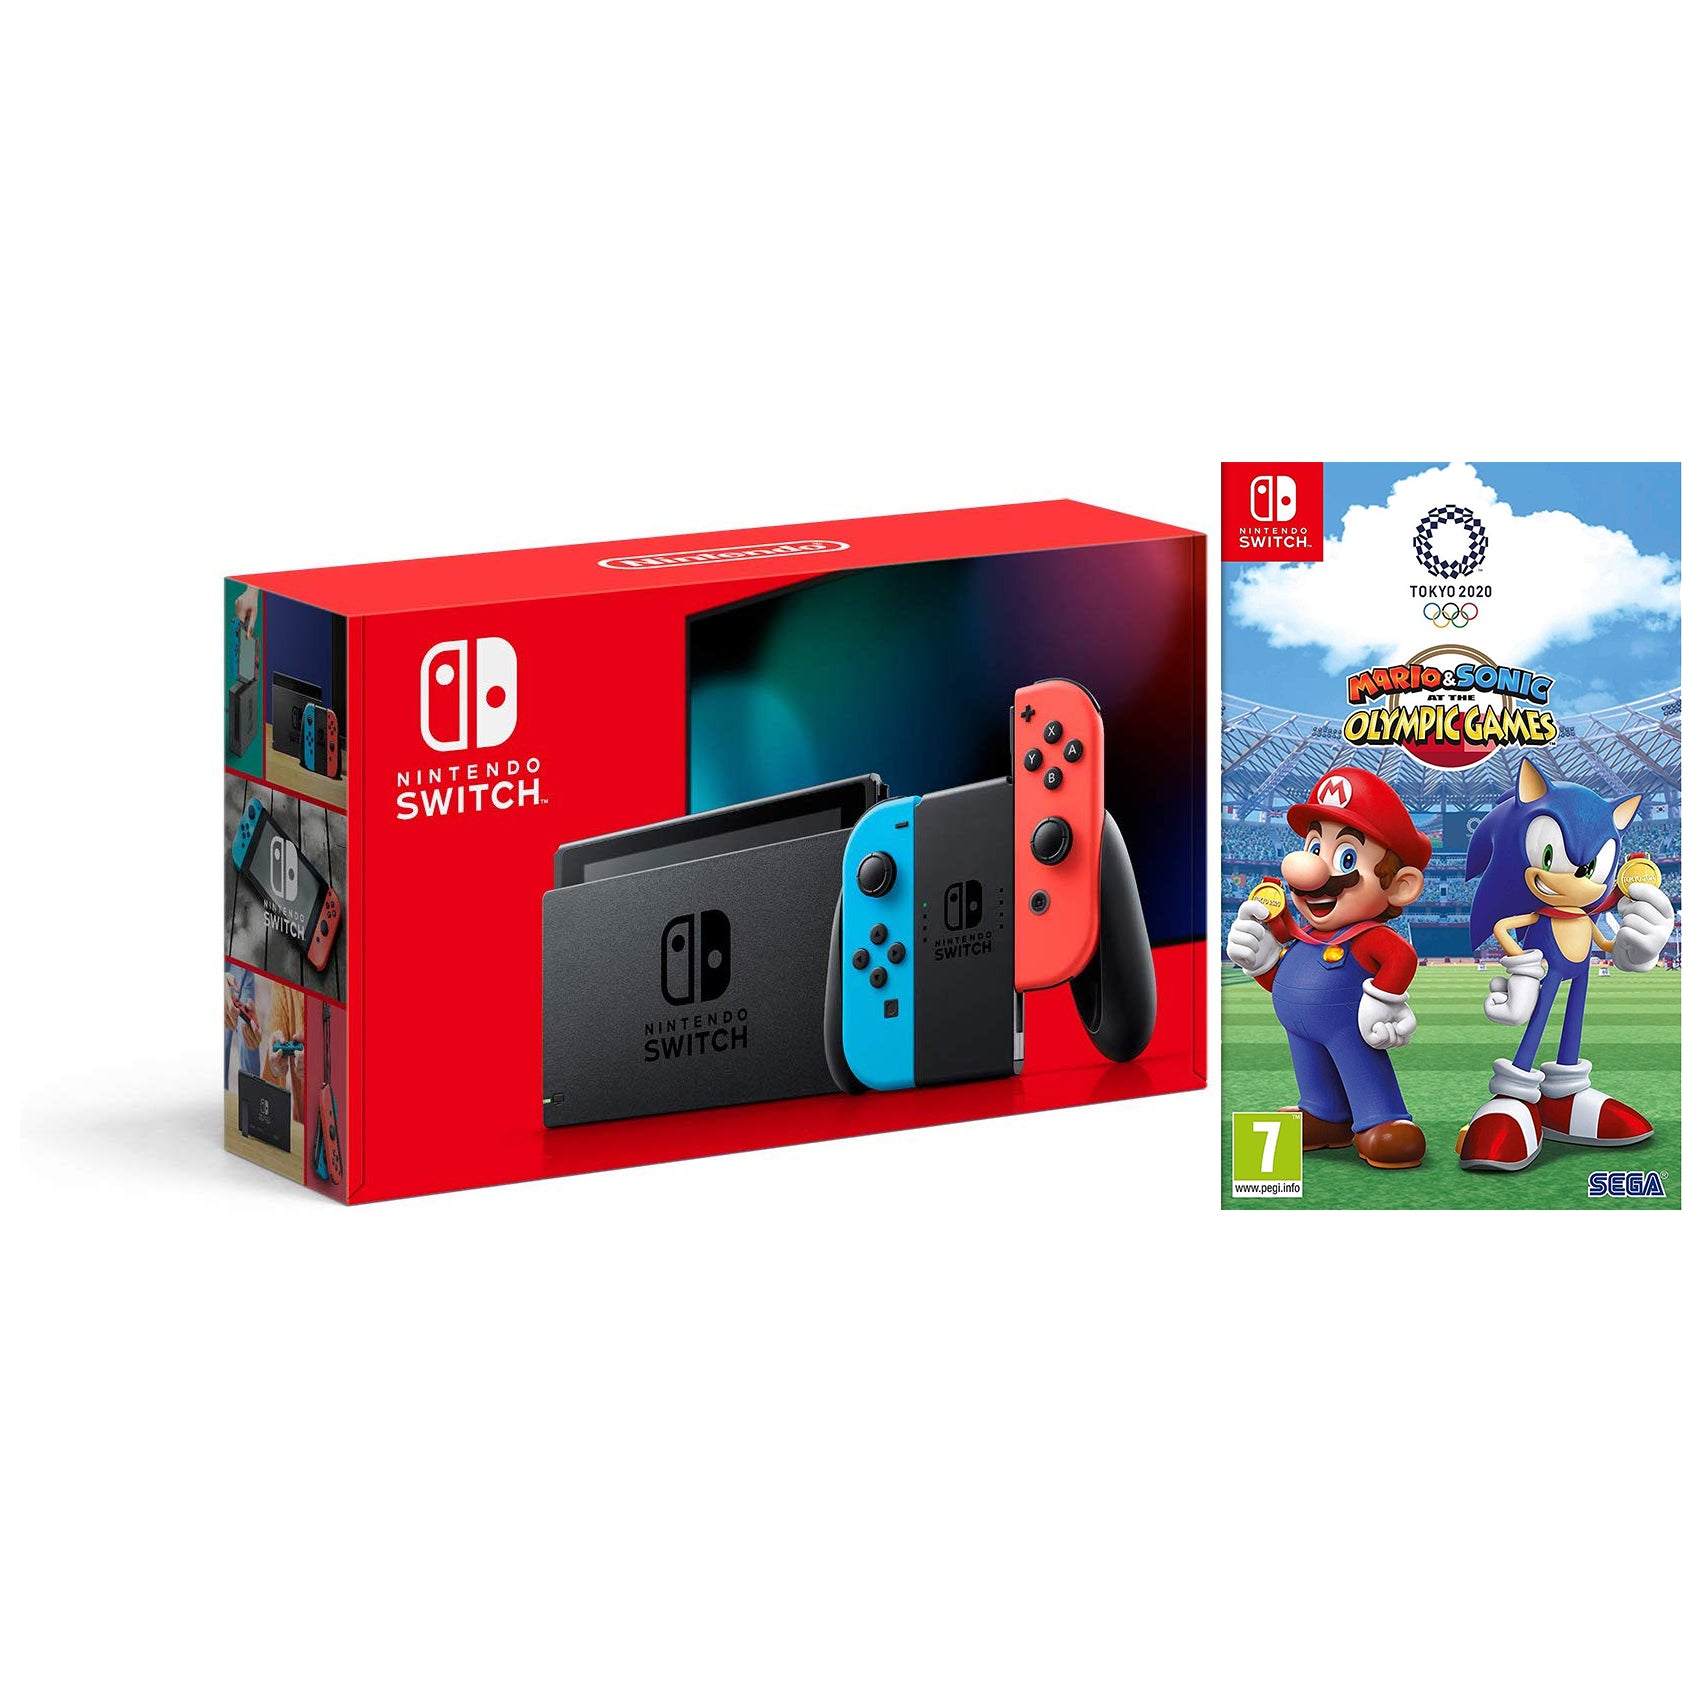 Nintendo Switch 32GB Console - Neon Joy-Con - New Version with Mario & Sonic Olympic Games 2020 Bundle - Pro-Distributing